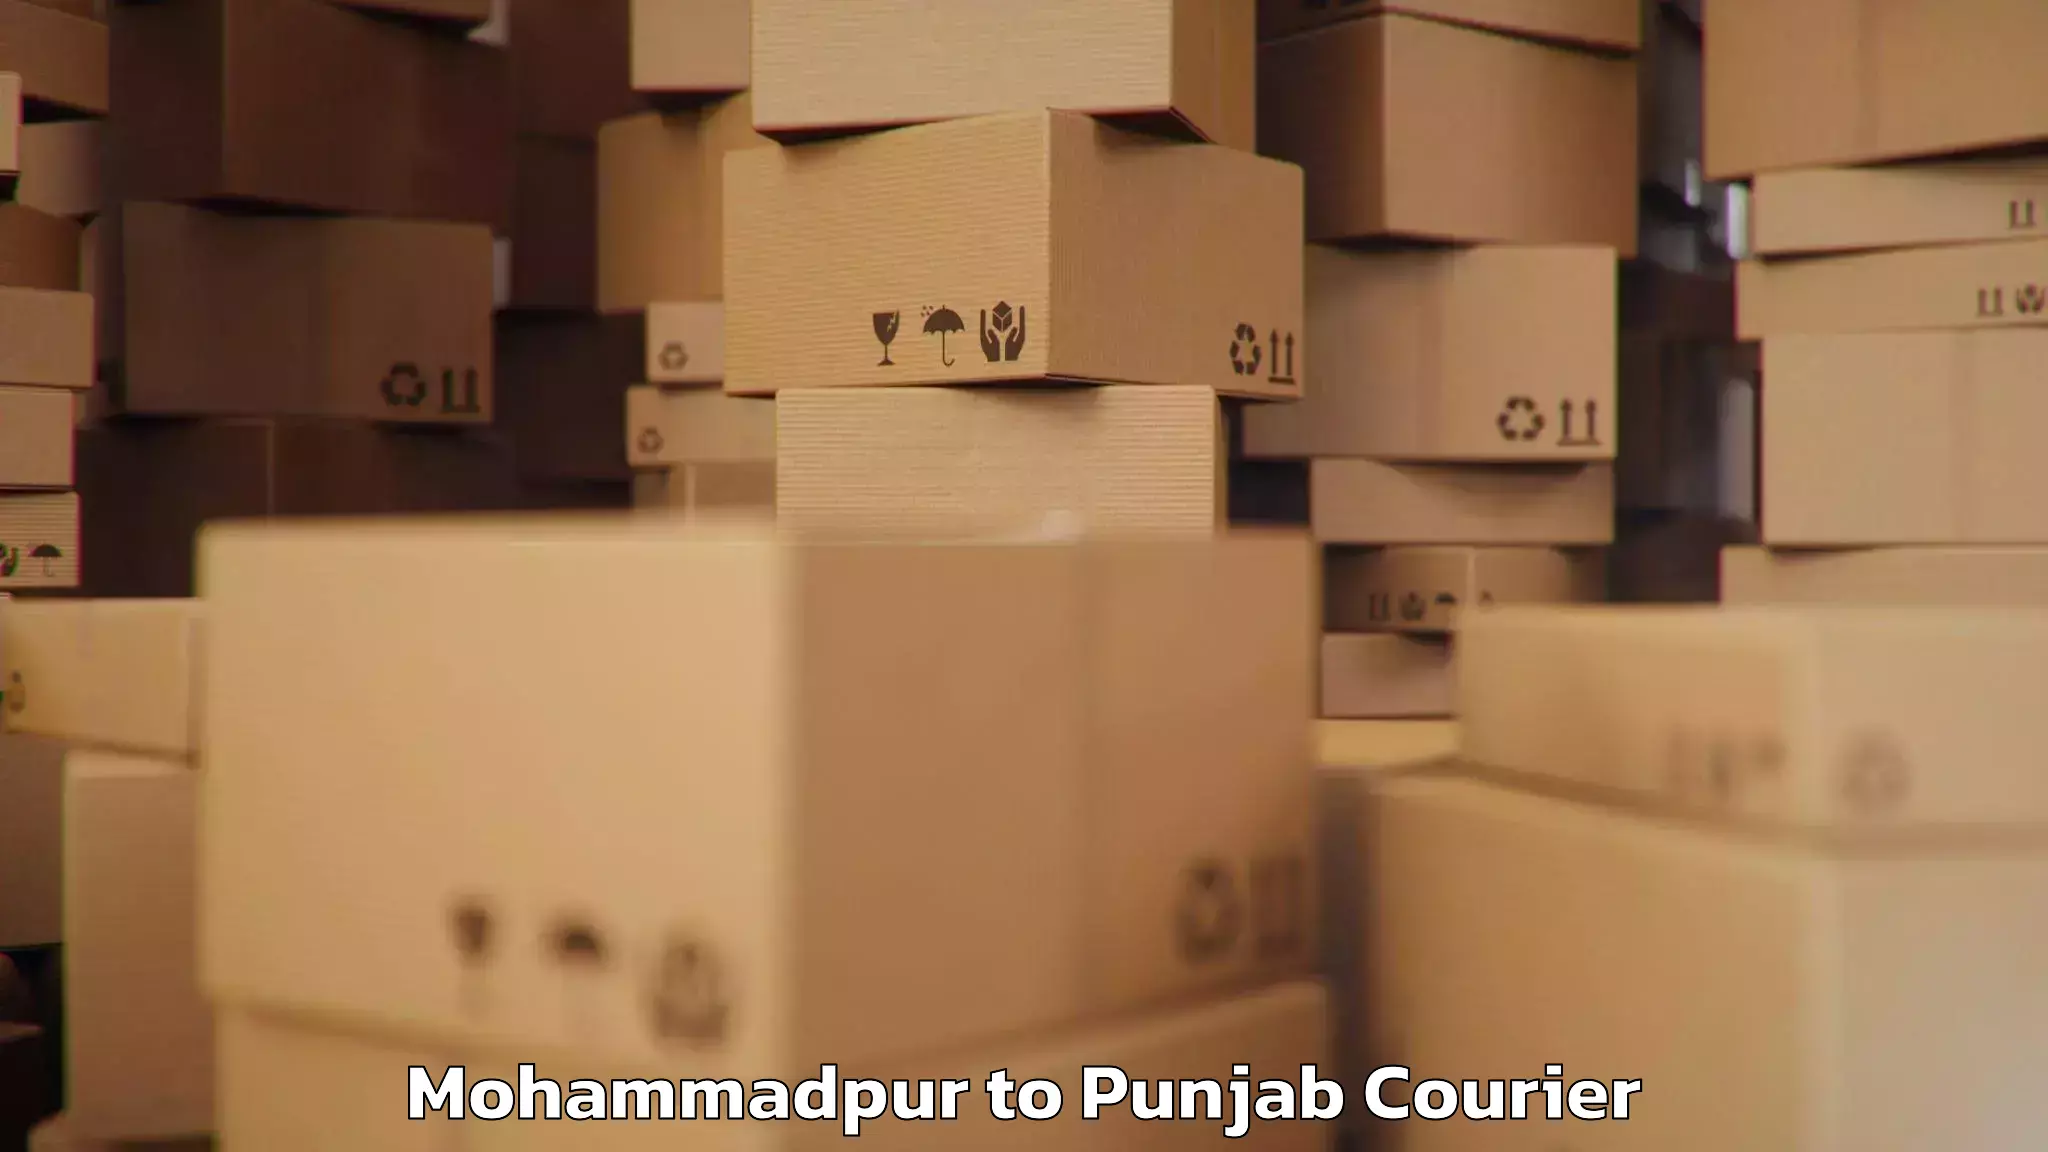 Personal effects shipping Mohammadpur to Mohali